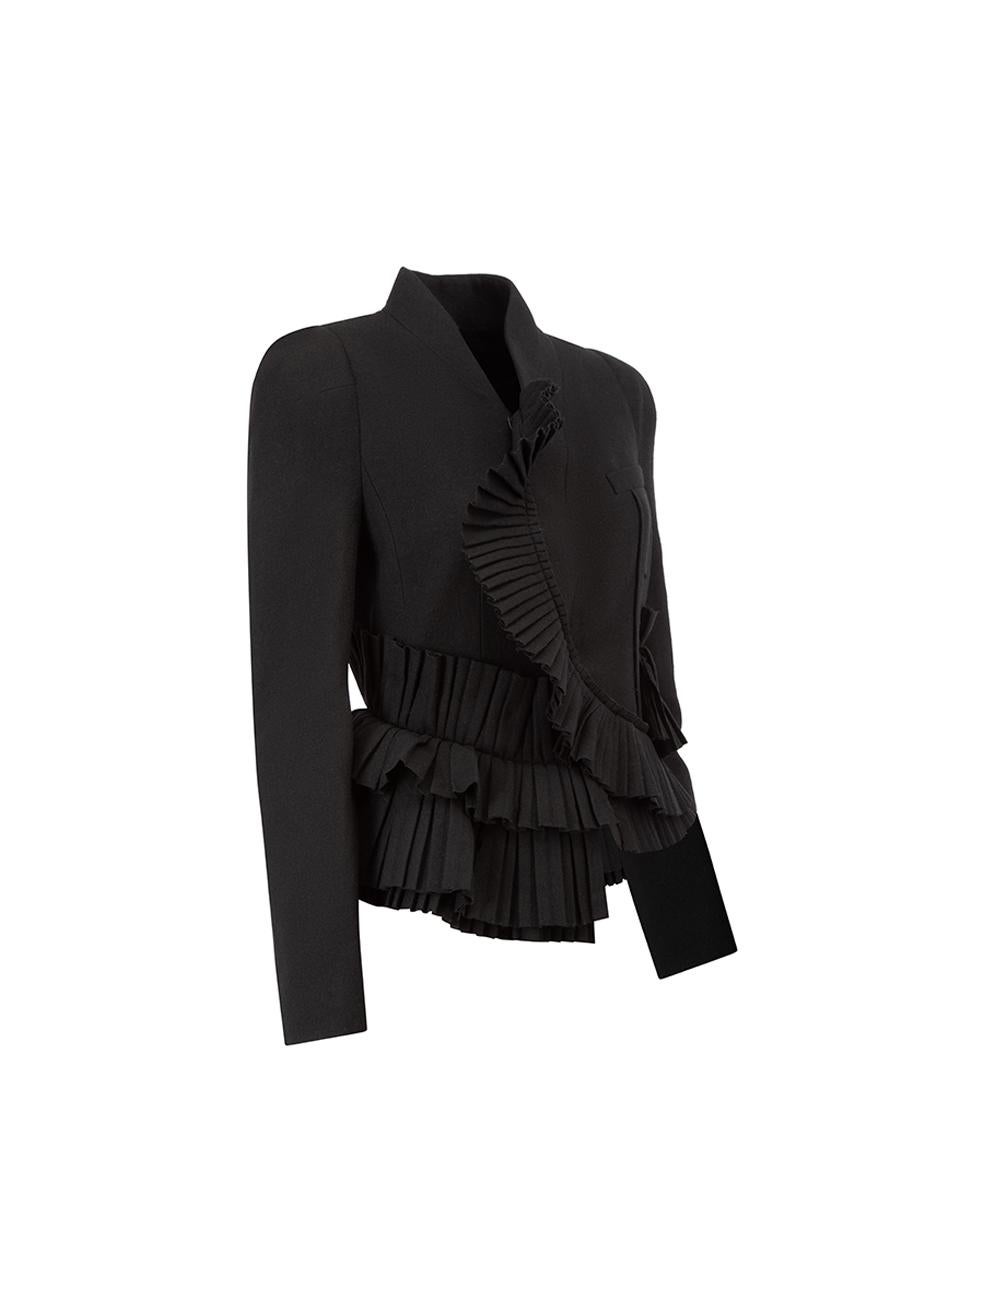 CONDITION is Very good. Hardly any visible wear to jacket is evident on this used Givenchy designer resale item. 



Details


Black

Wool

Fitted jacket

Ruffles trimmings

Asymmetric front snap button closure

Zipped cuffs

Single chest